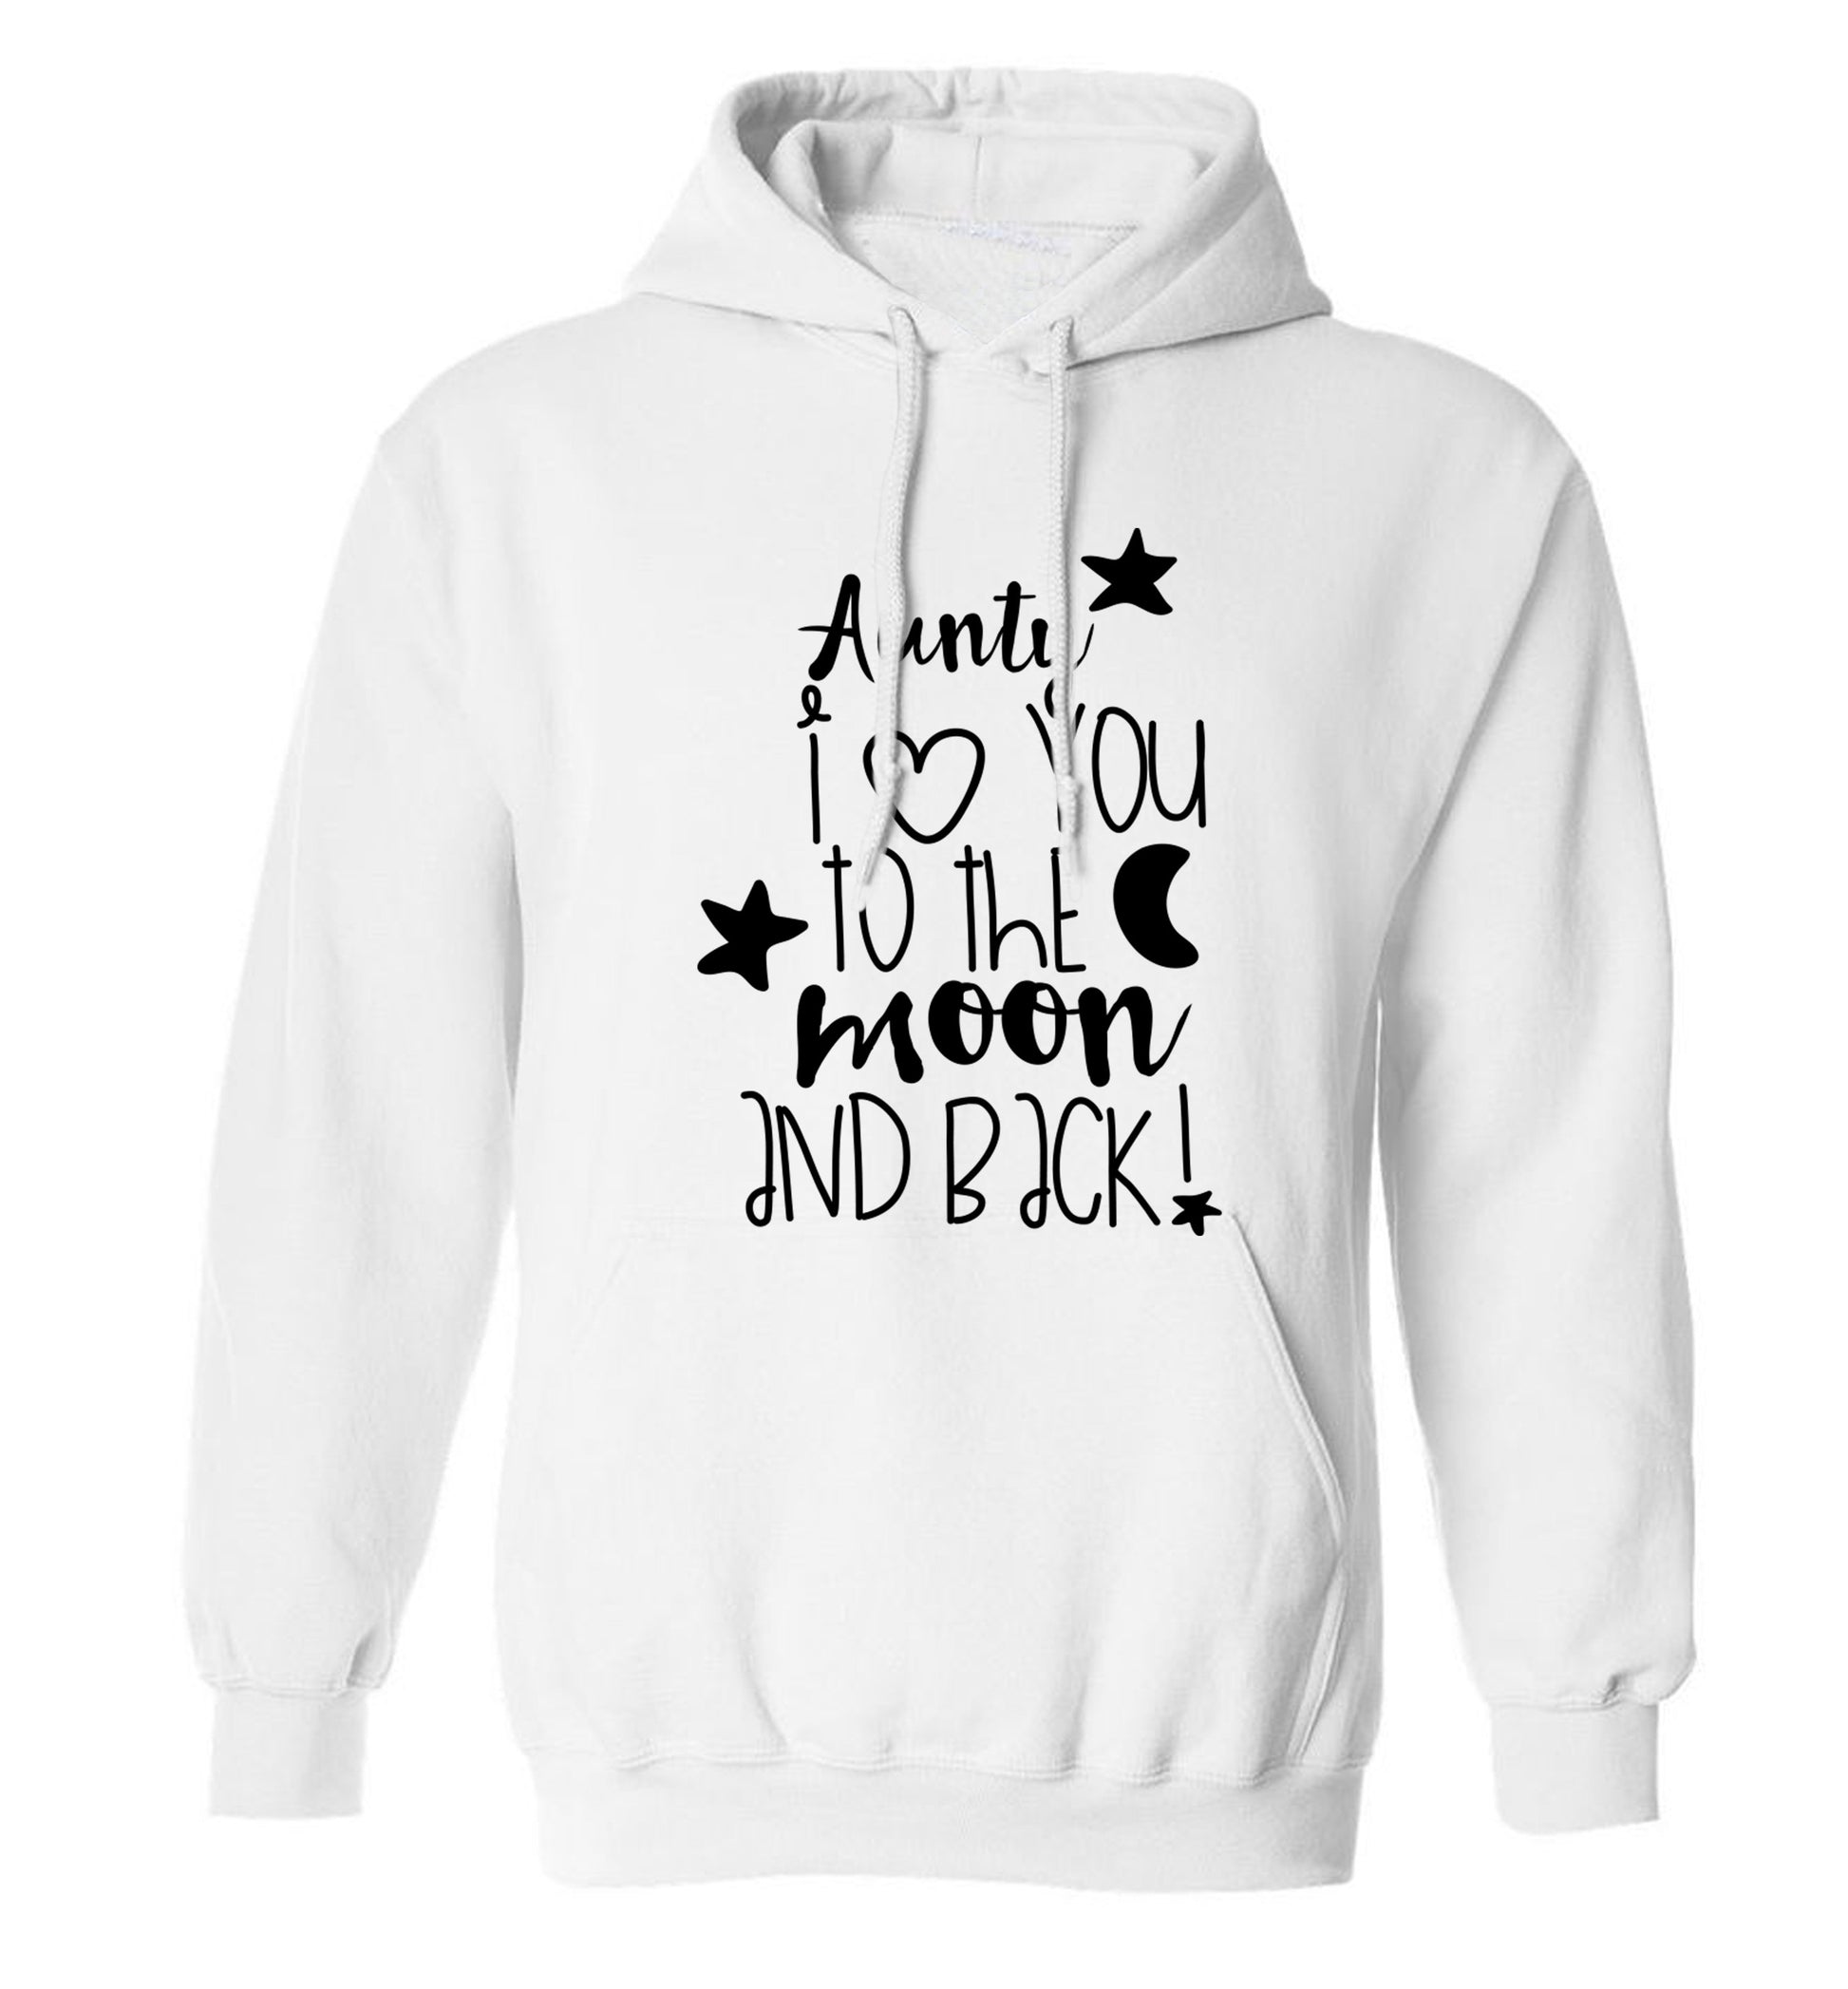 Aunty I love you to the moon and back adults unisex white hoodie 2XL